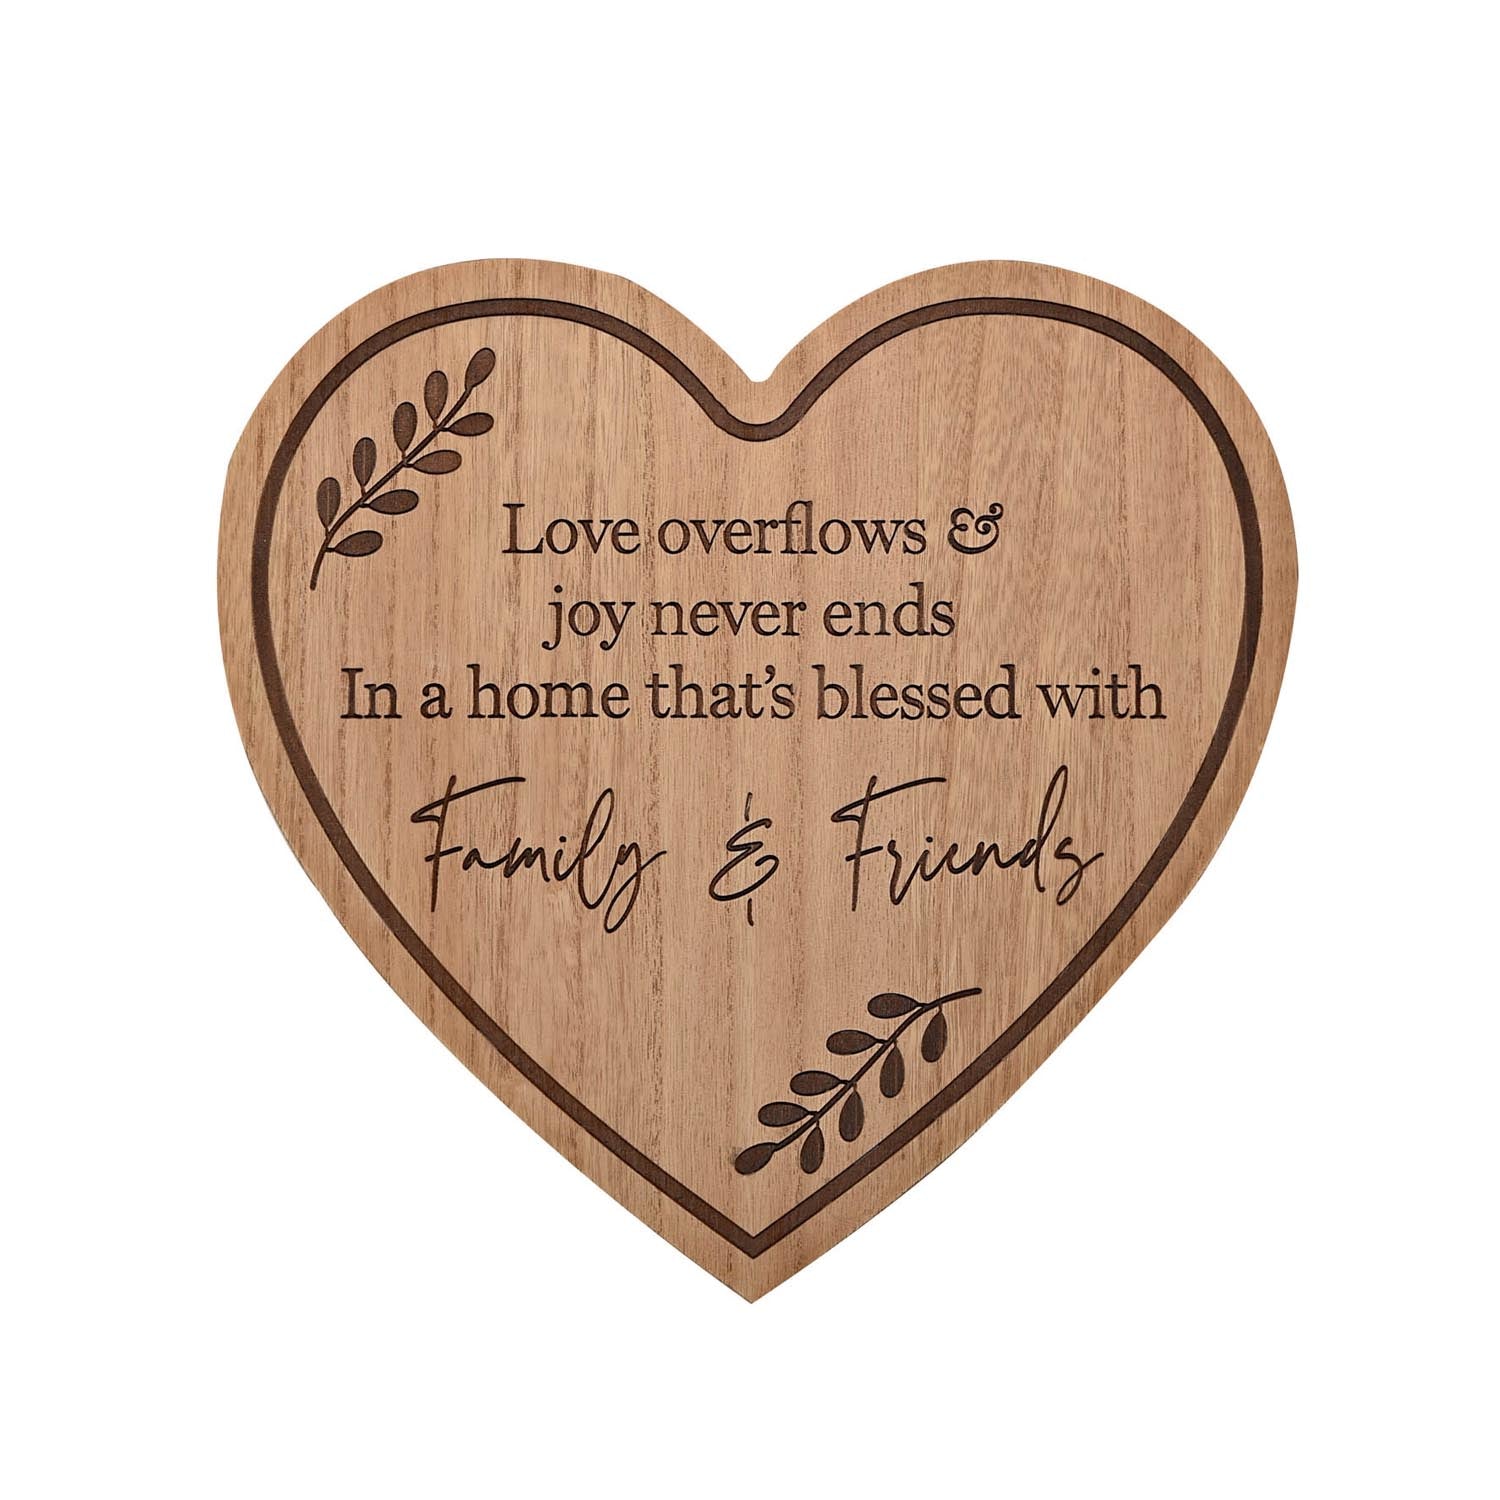 Moments Moments Wooden Heart Plaque - Family Friends 30cm 1 Shaws Department Stores